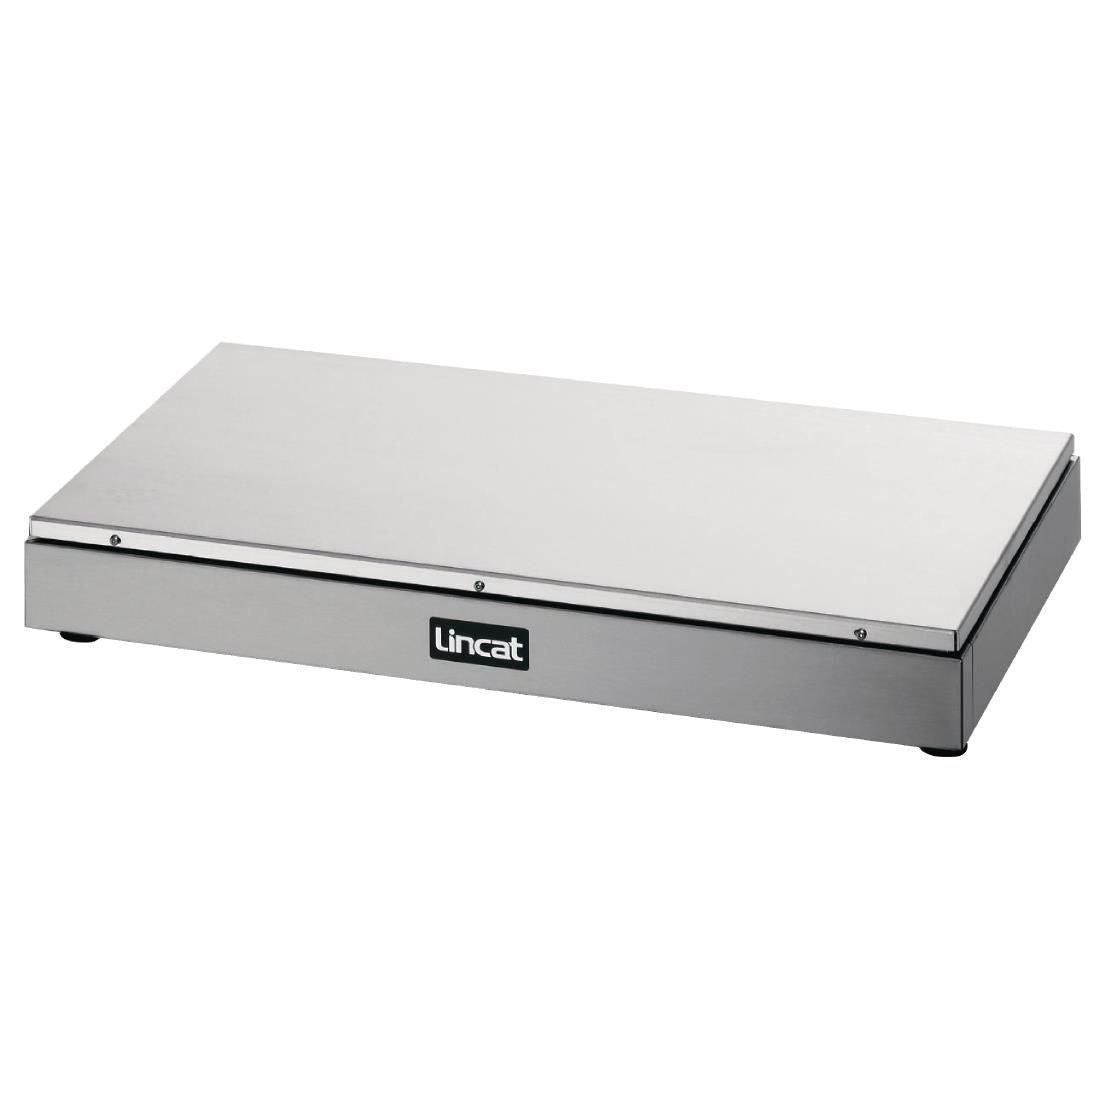 HB2 - Lincat Seal Counter-top Heated Display Base - 2 x 1/1 GN - W 754 mm - 1.0 kW JD Catering Equipment Solutions Ltd